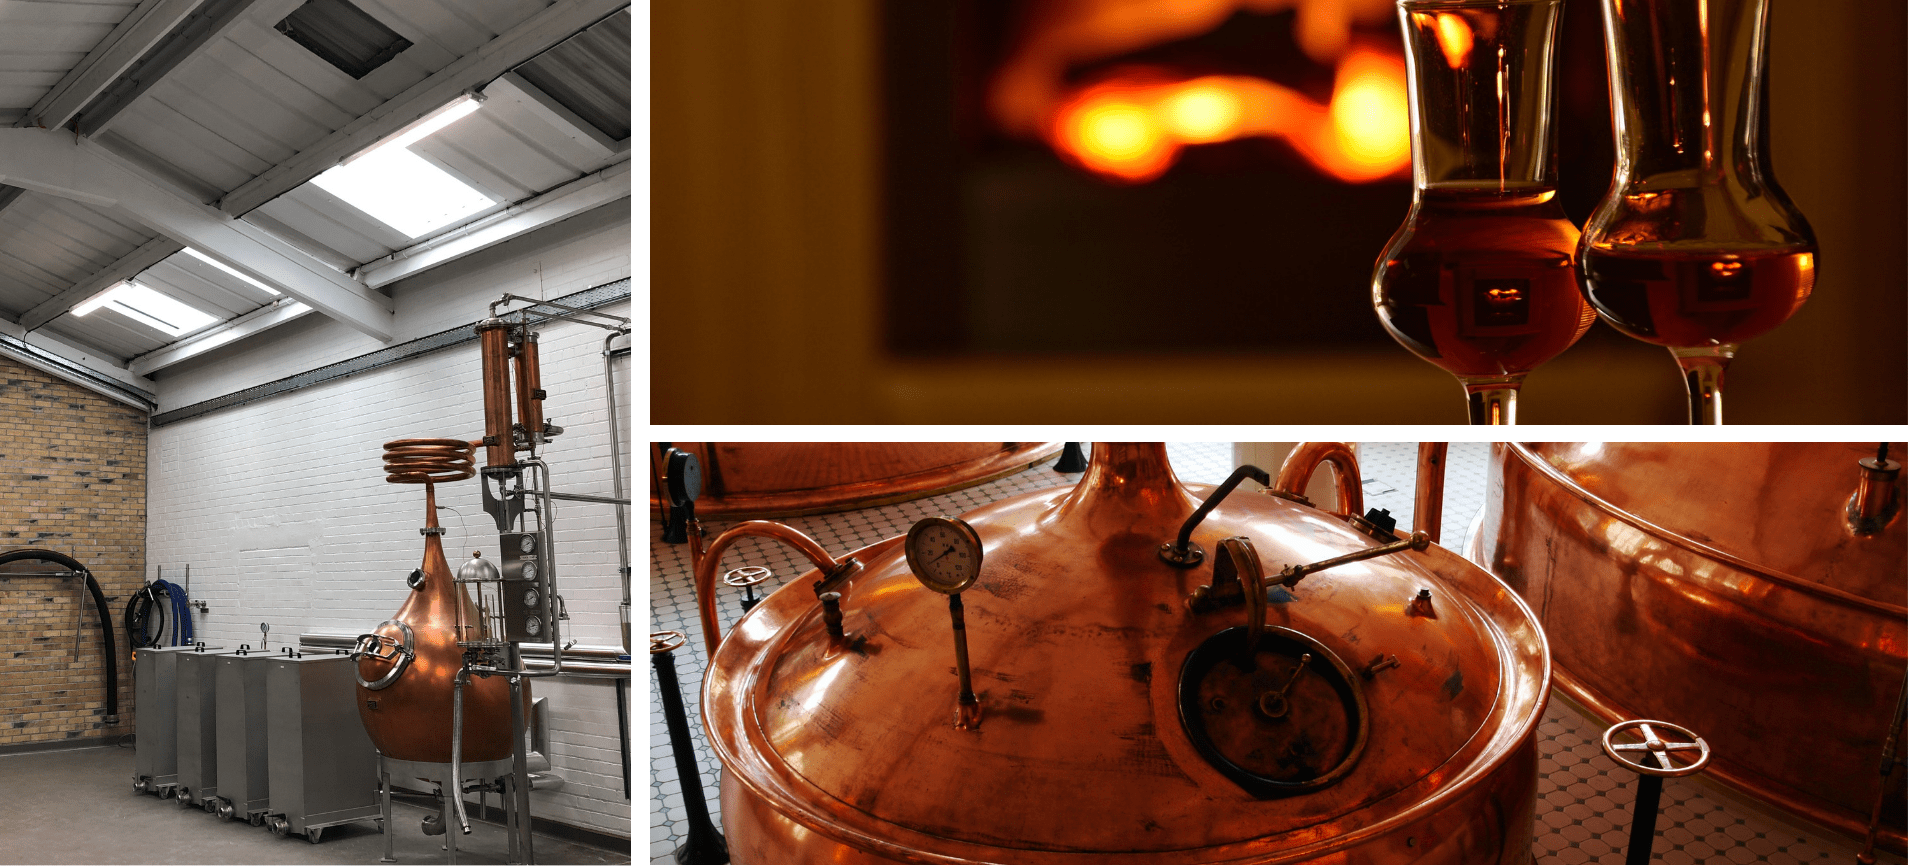 Three image collage with whisky and distillery images